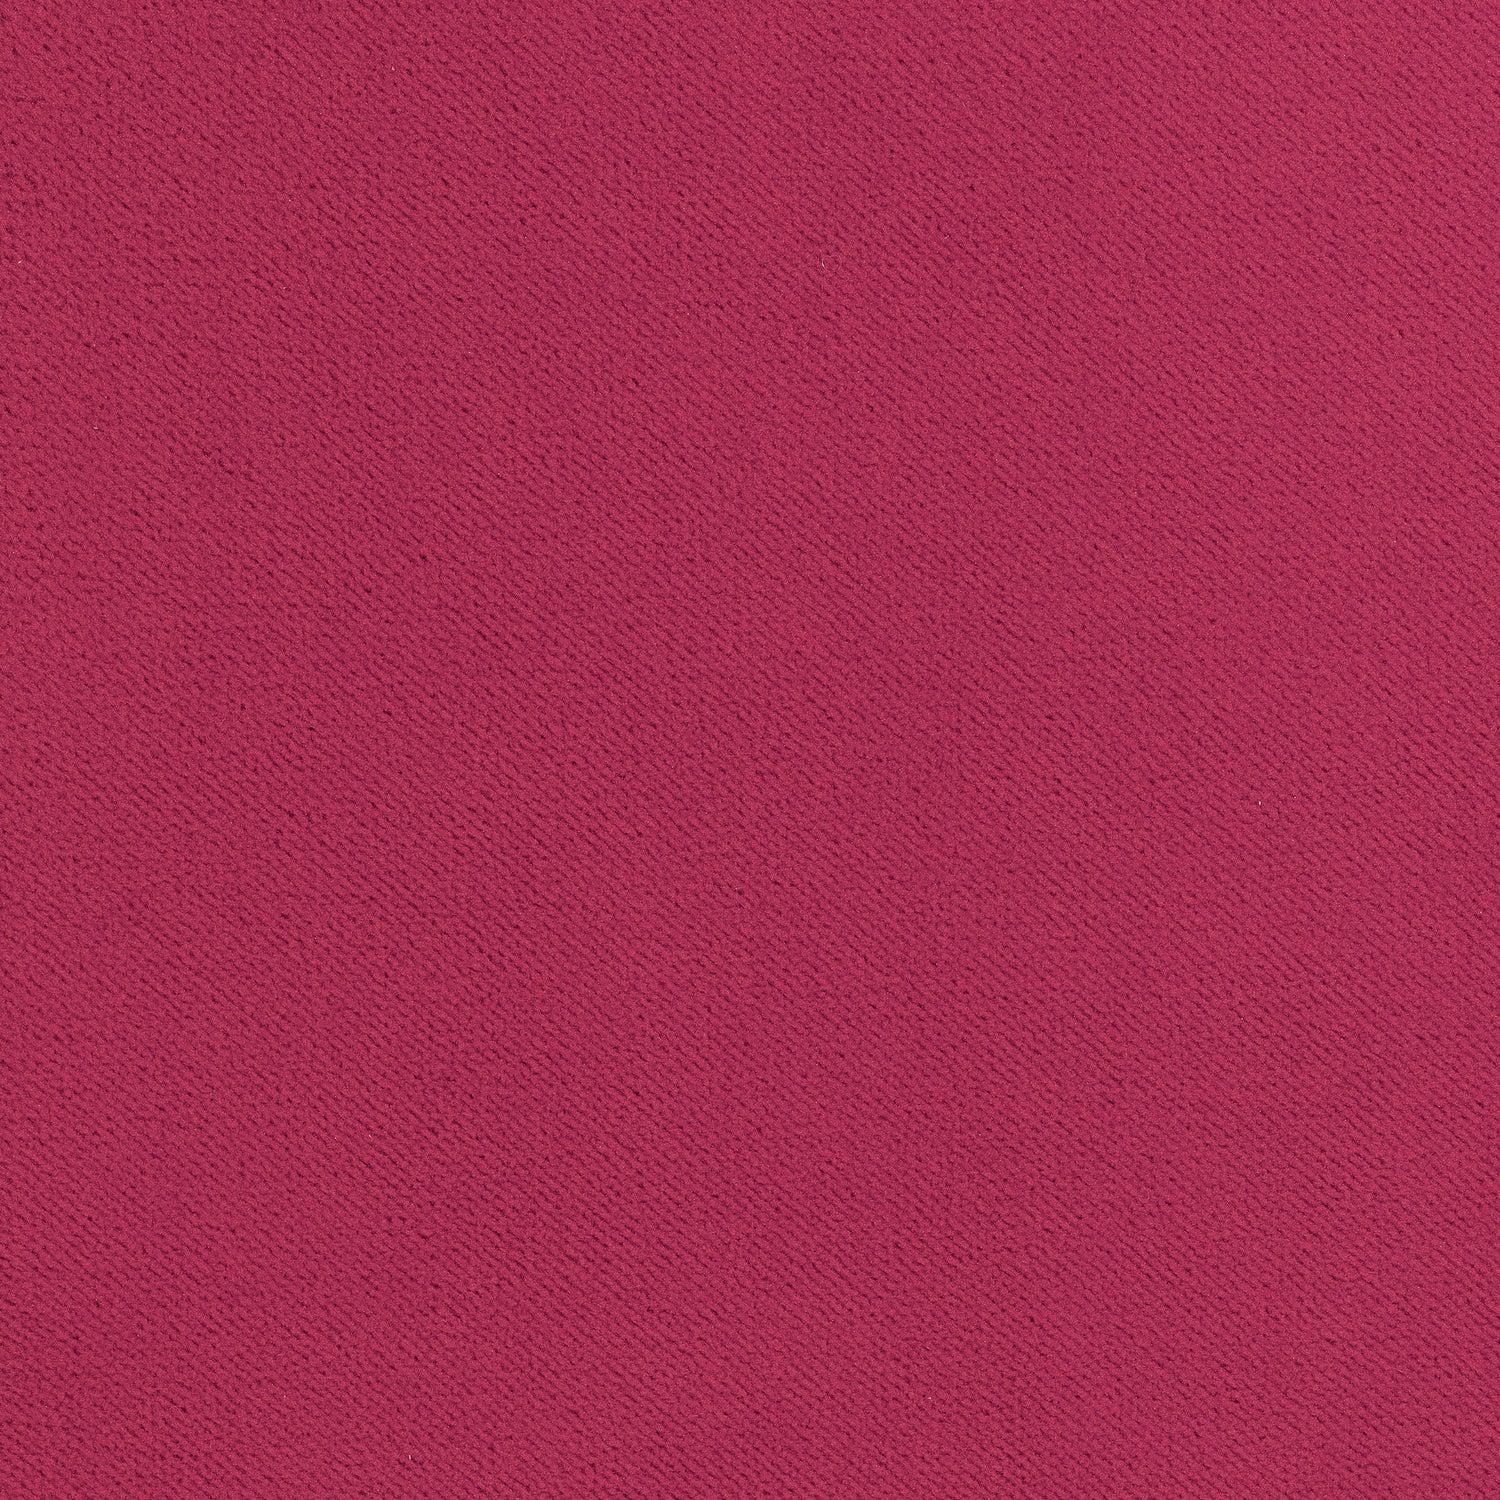 Club Velvet fabric in peony color - pattern number W7207 - by Thibaut in the Club Velvet collection